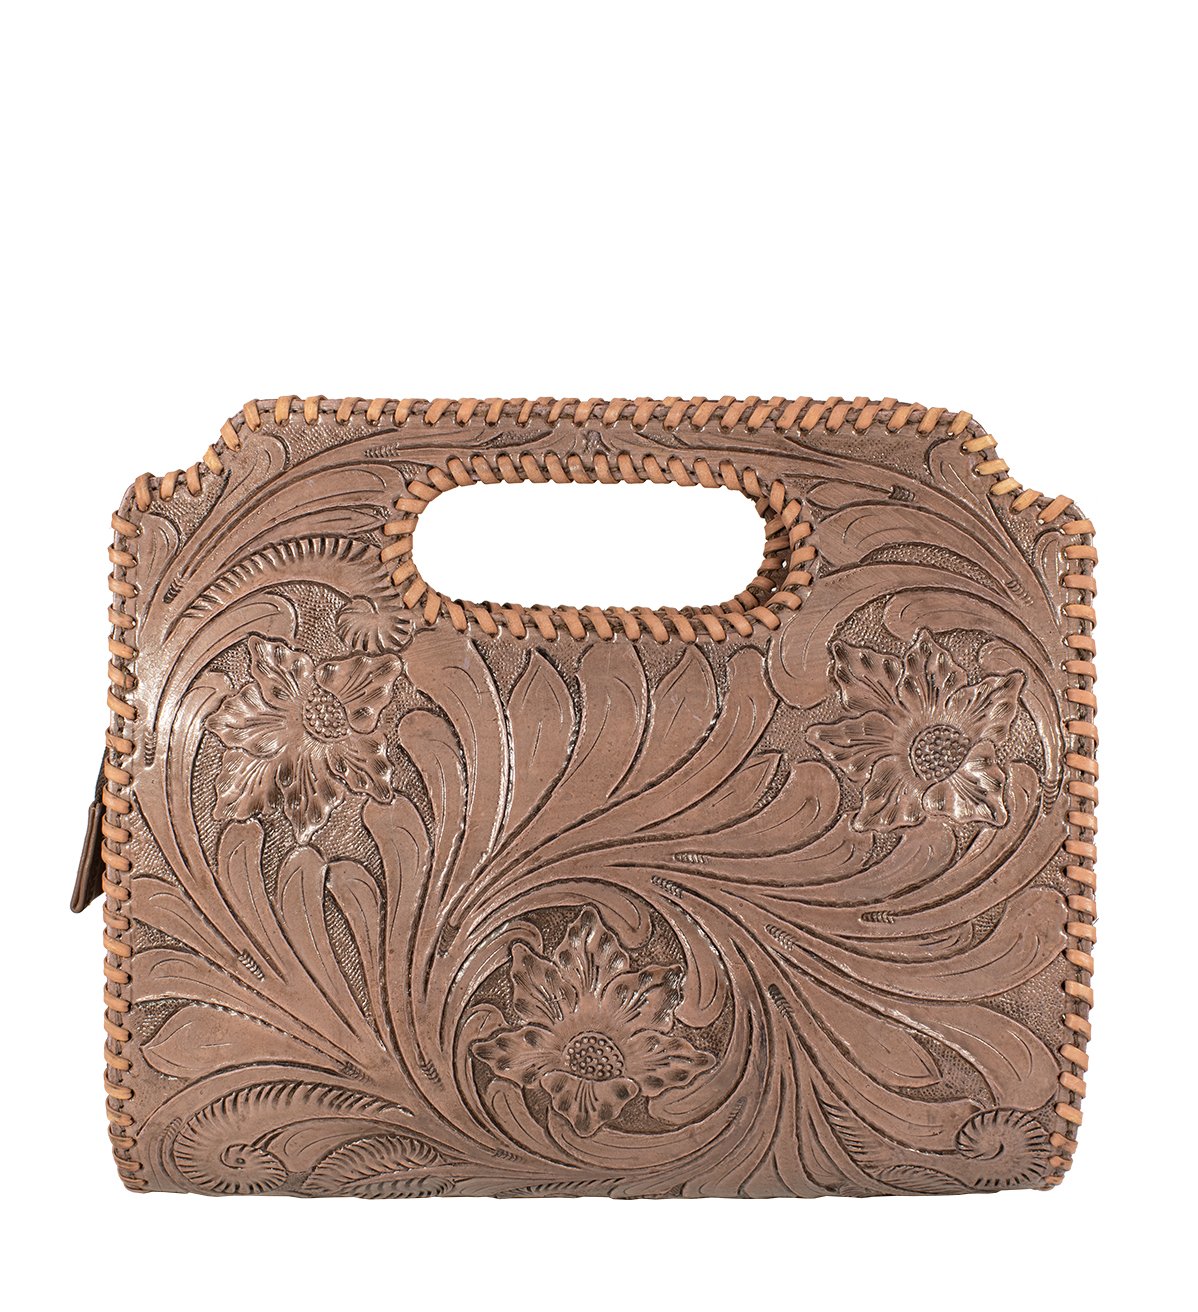 Western Classic Embroidery Tooled Handbag - #LB-04 DR